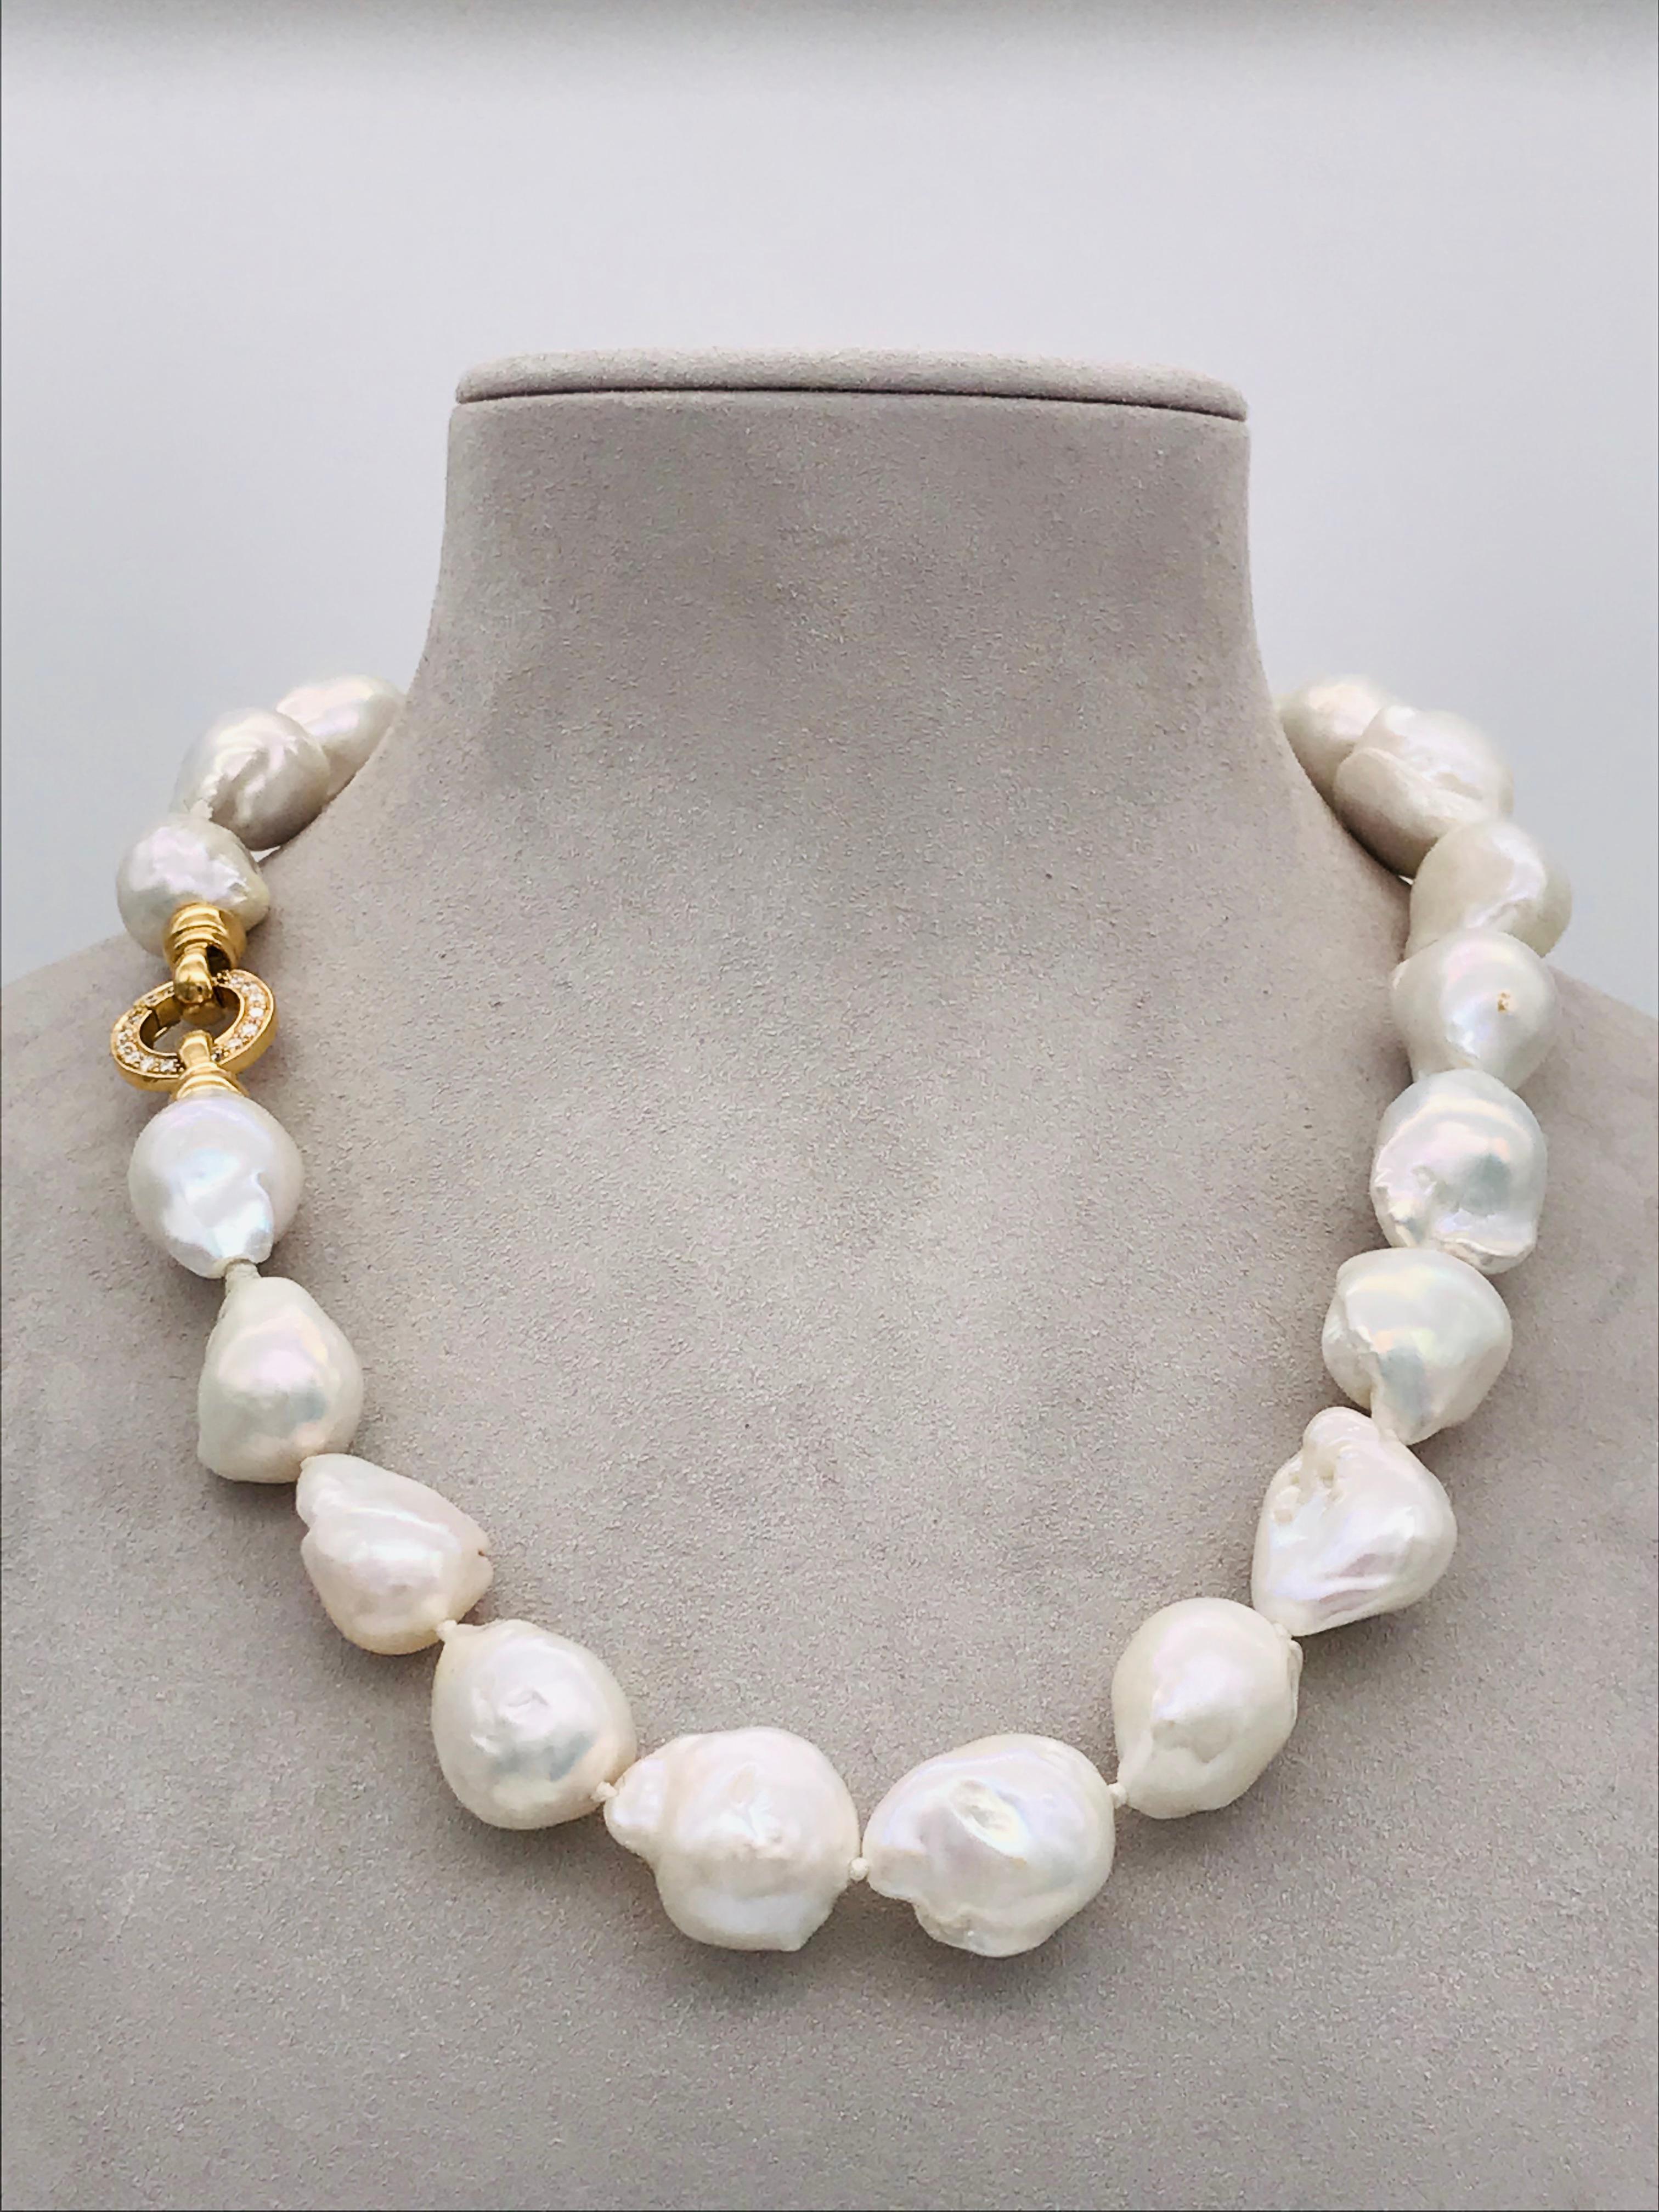 Baroques Pearls Necklaces with Gold and Diamonds Clasp 5